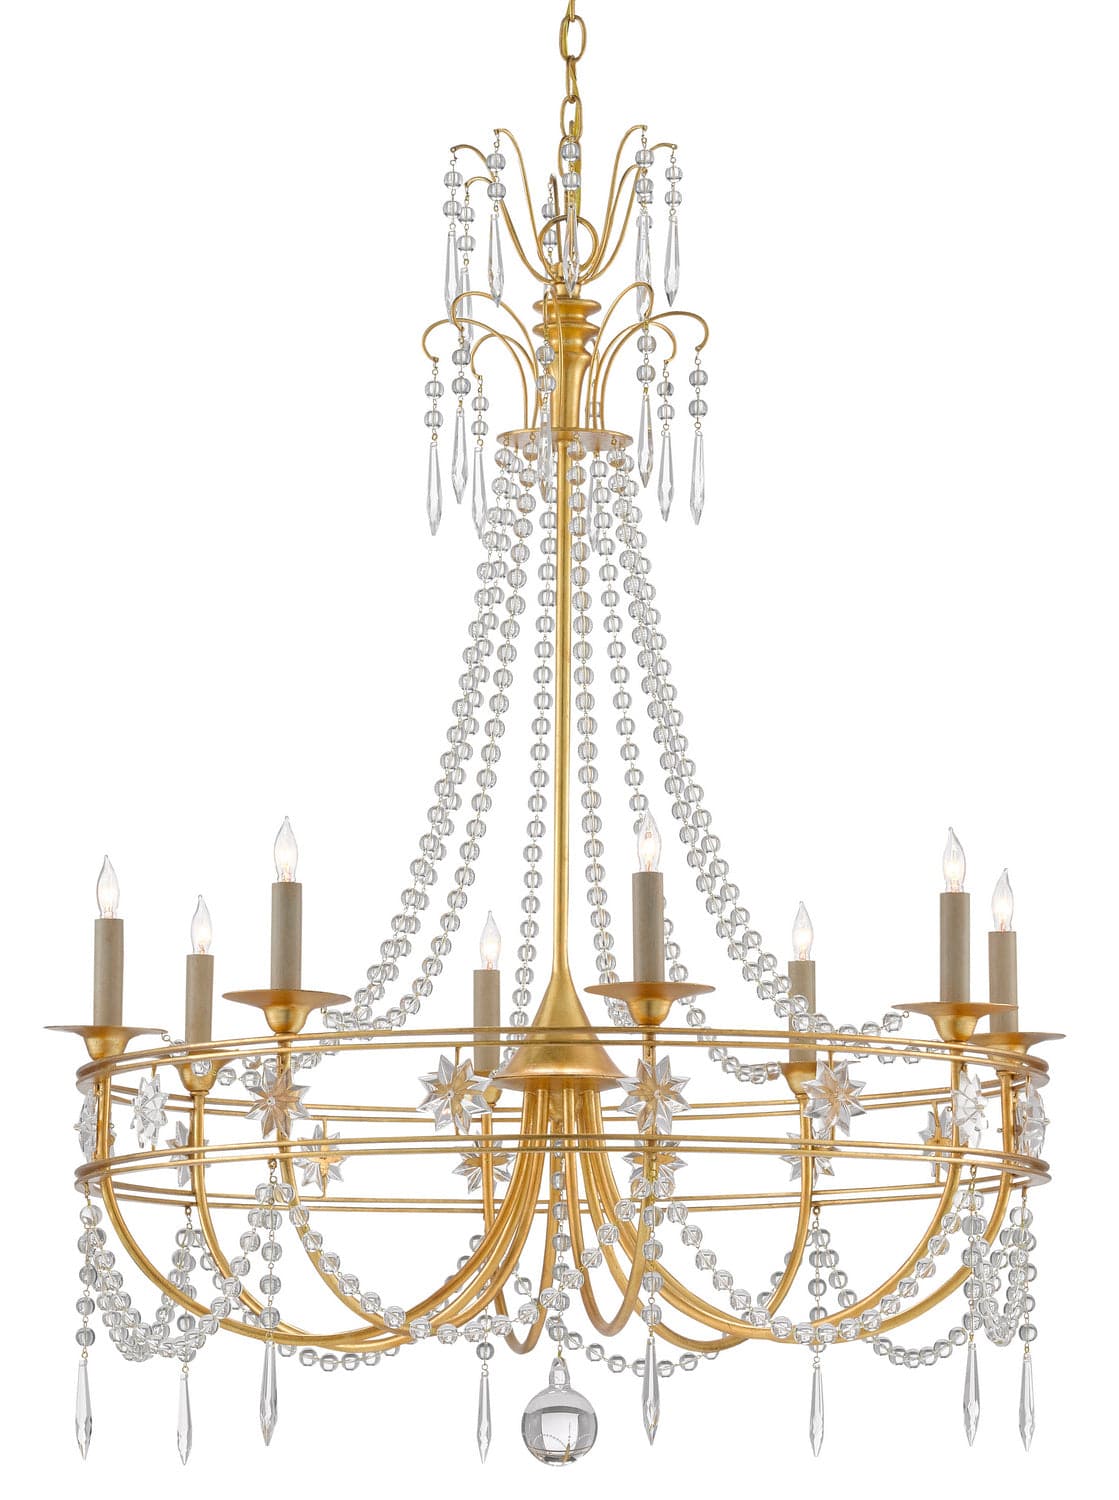 Eight Light Chandelier from the Dream-Maker collection in Antique Gold Leaf finish